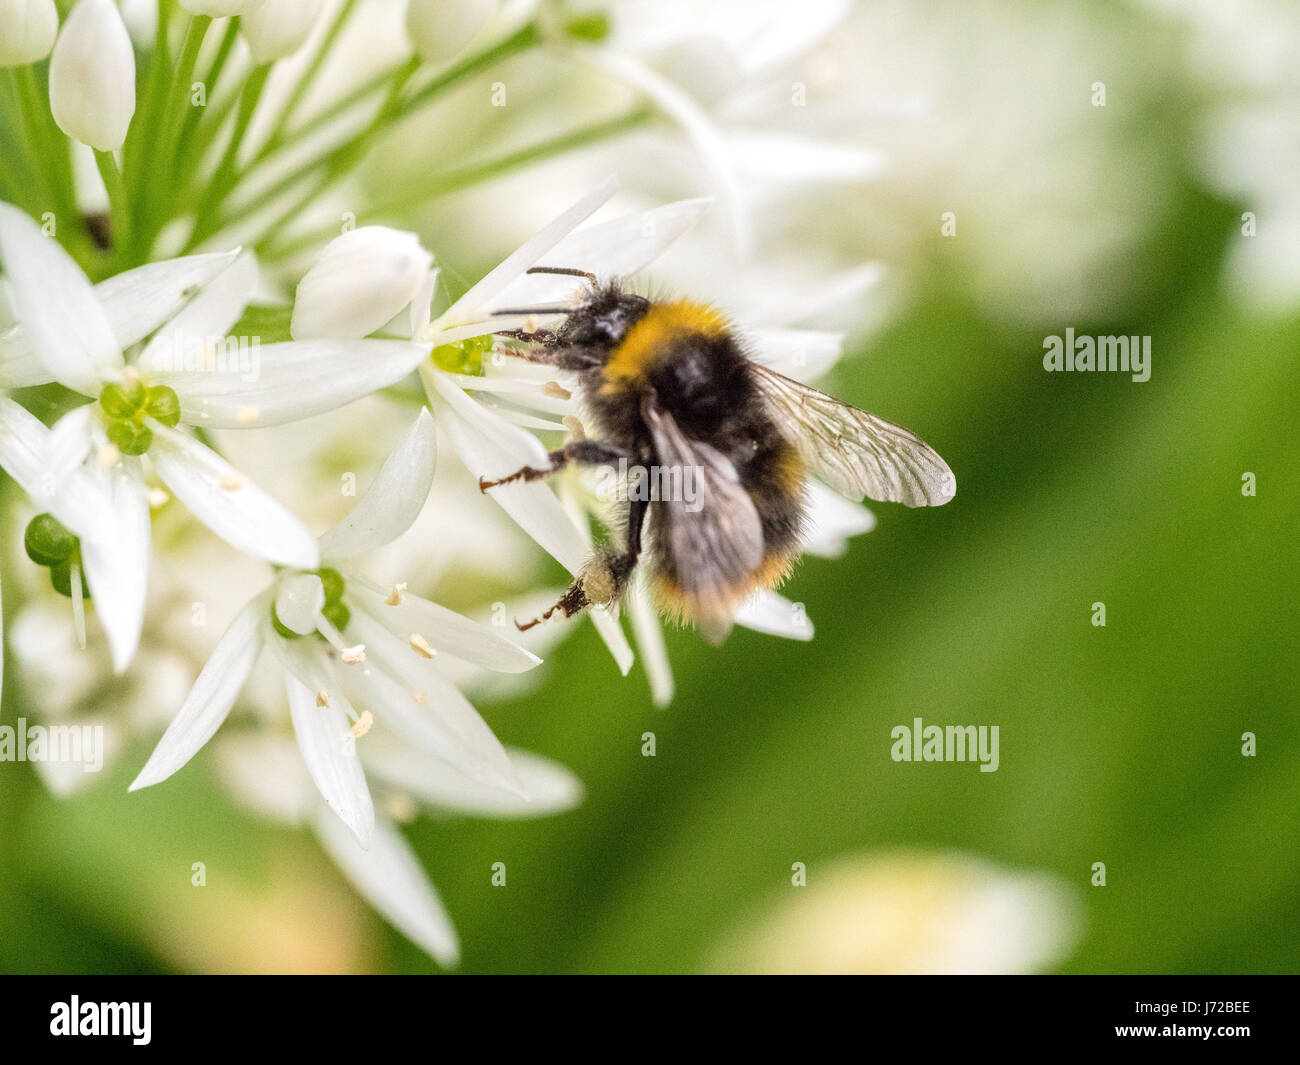 a bumblebee collecting nectar from the pollen of a white flower Stock Photo